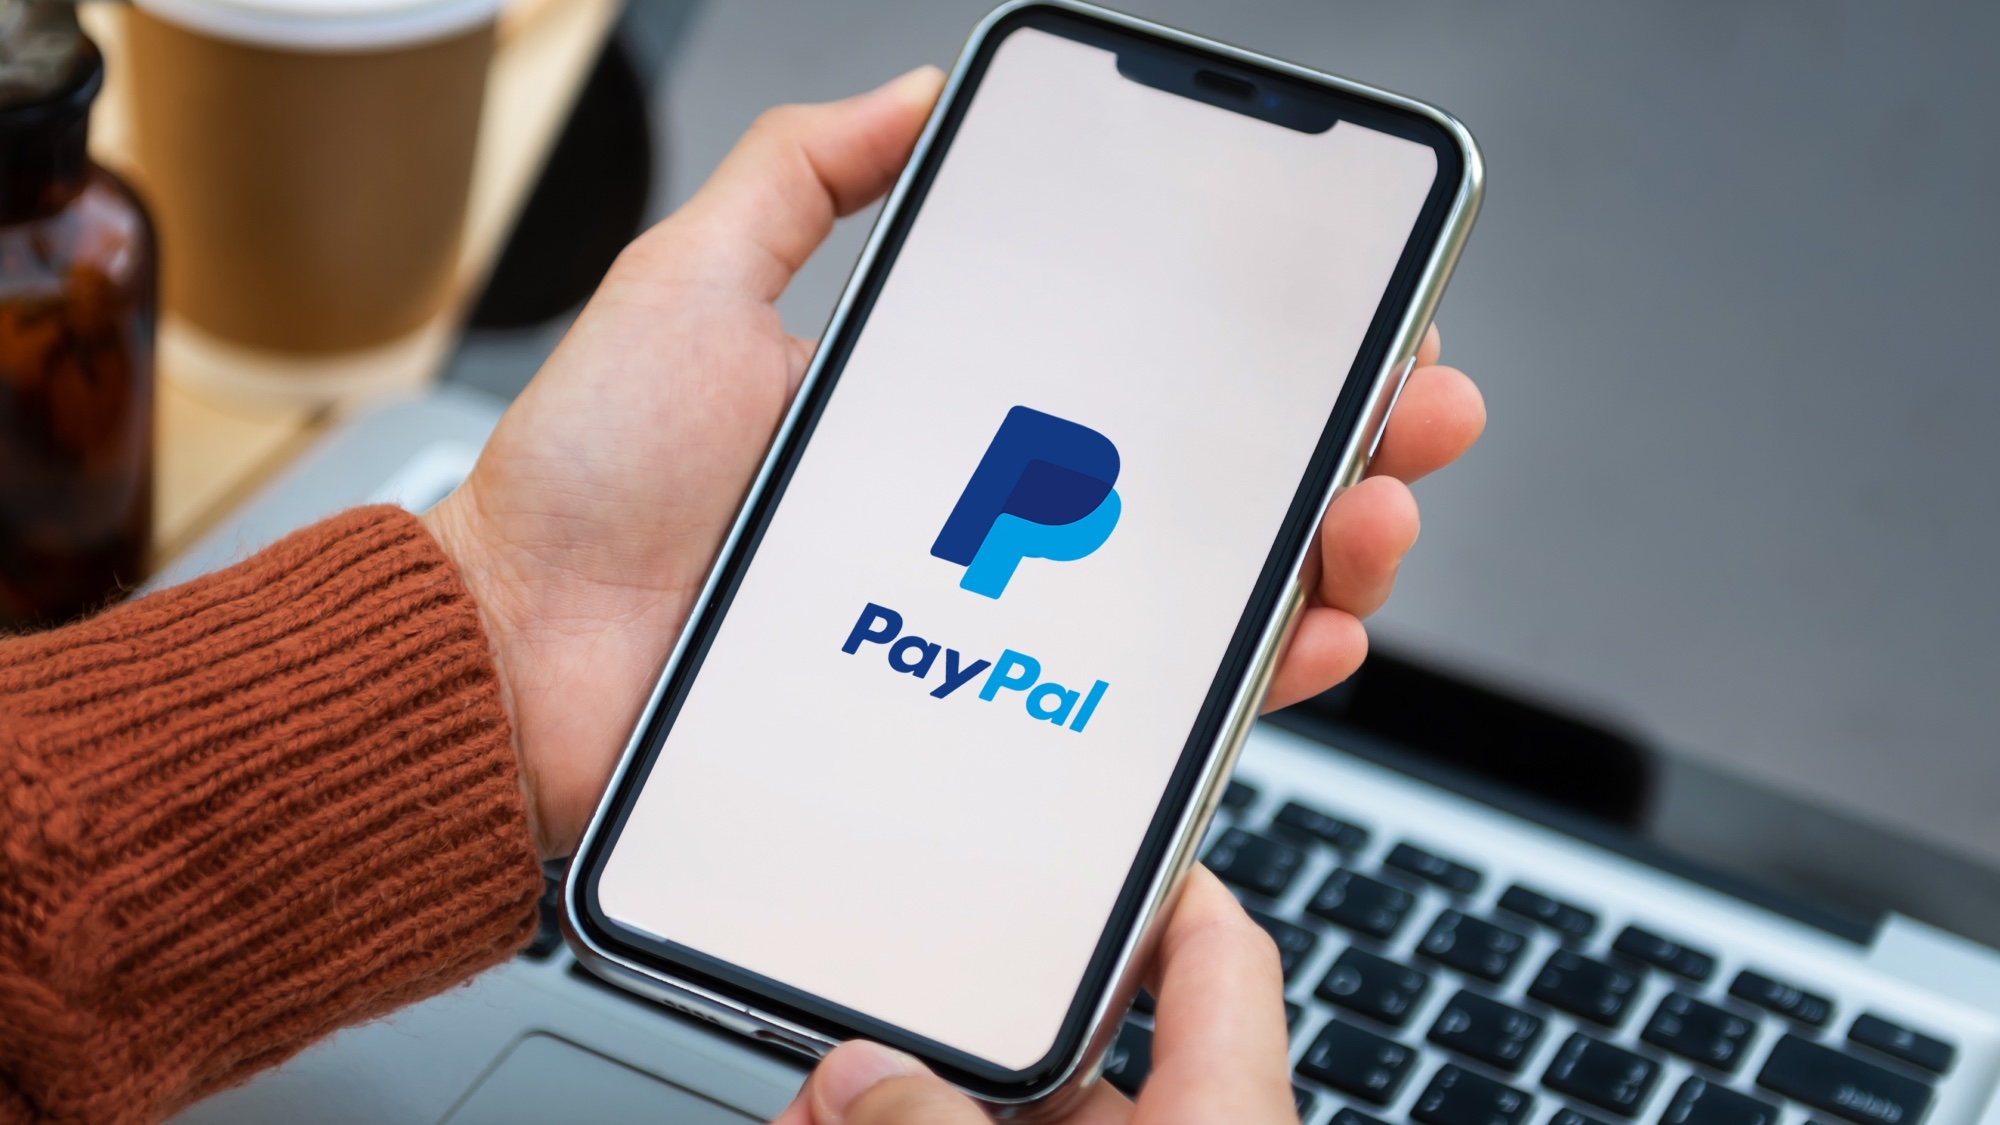 How to Use Paypal in Stores? - 2023 Ultimate Guide for Retailers